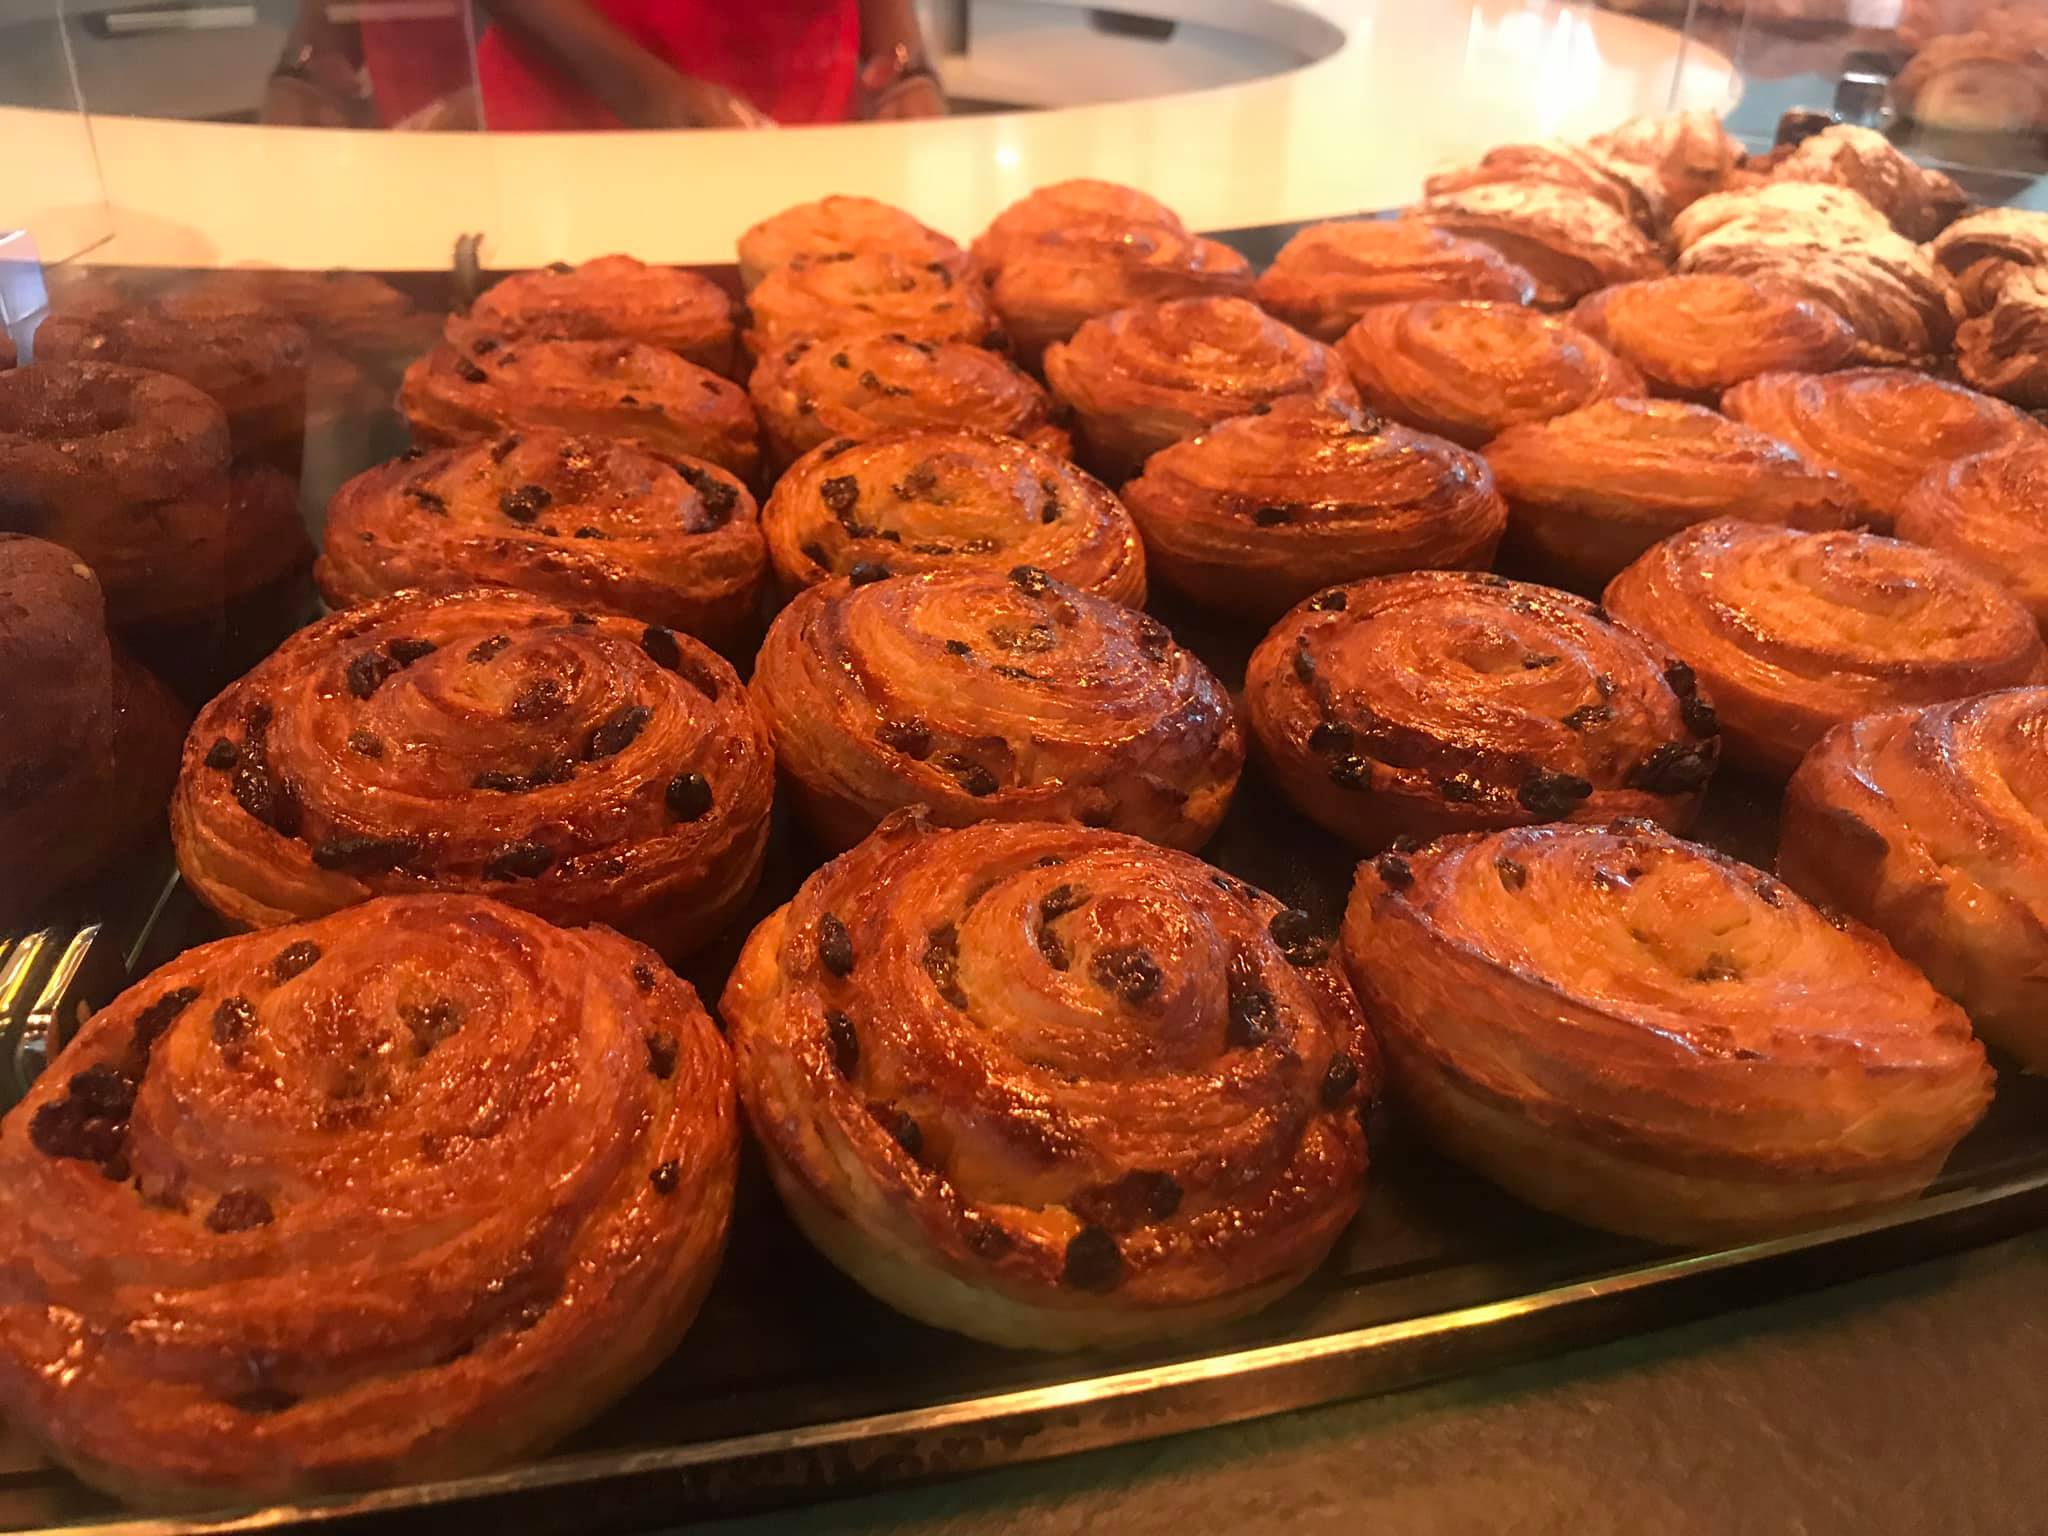  Amazing raisin buns at Le Grenier at the Riverside Building in Westlands. Absolutely delicious. They know what they are doing in the pastry department. Also they had the best coffee of the three places I had coffee in Nairobi. Their sticky bun also 